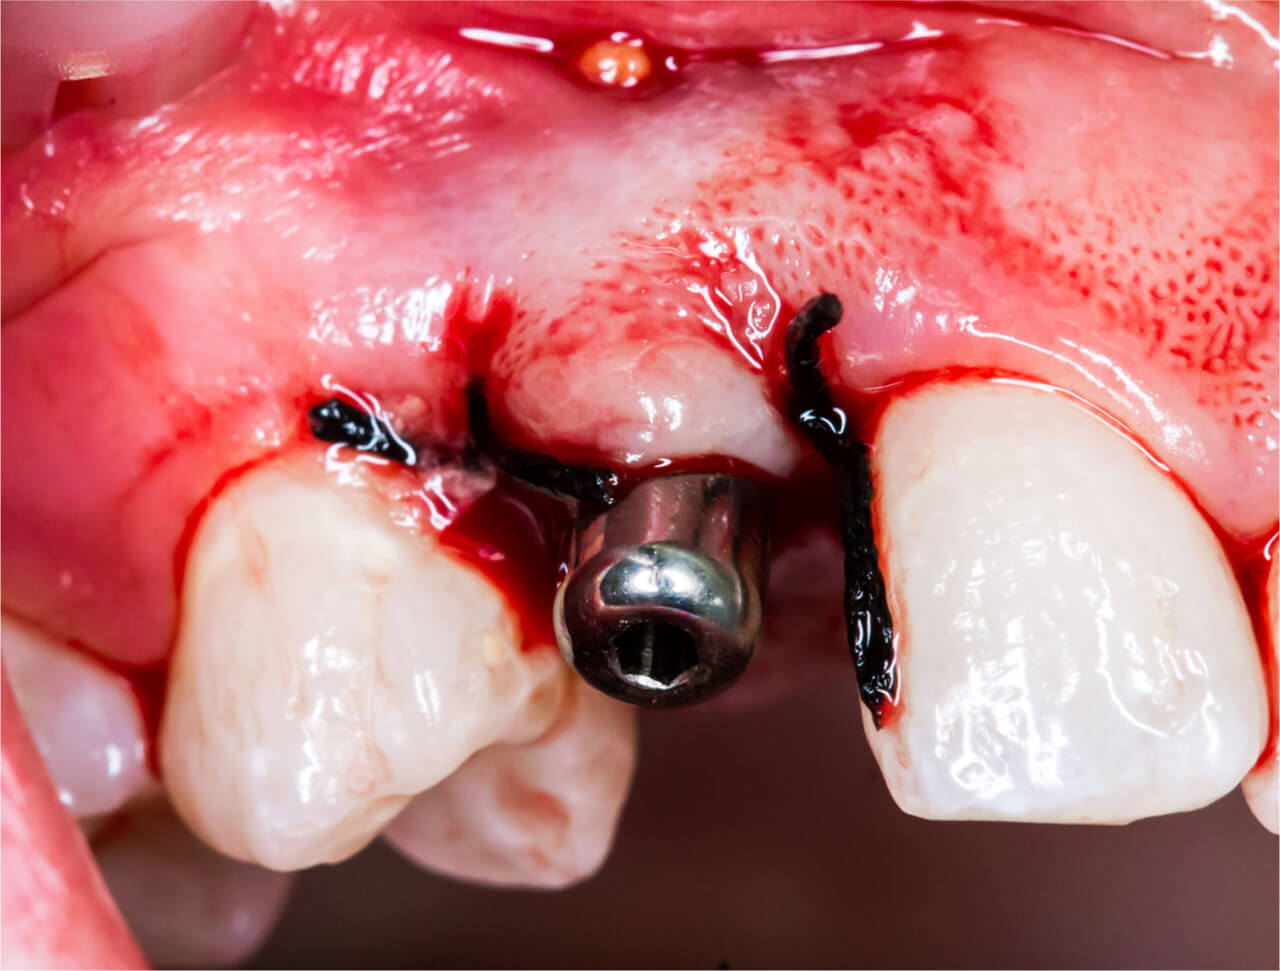 dental implant infections